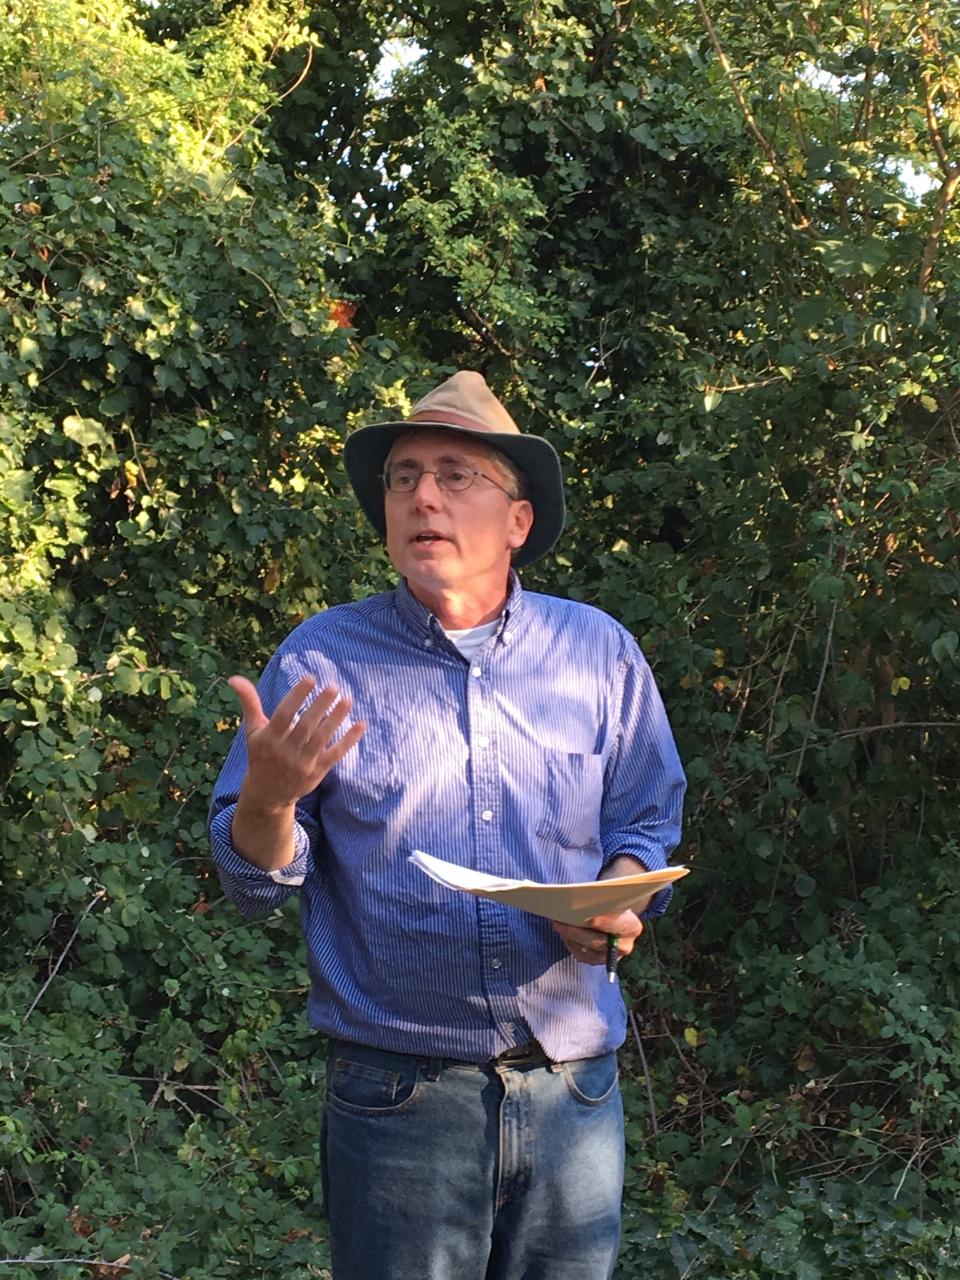 Photo of a man in a fedora hat and blue button-down shirt, standing in front of some wild greenery, reading out loud from a sheaf of papers.